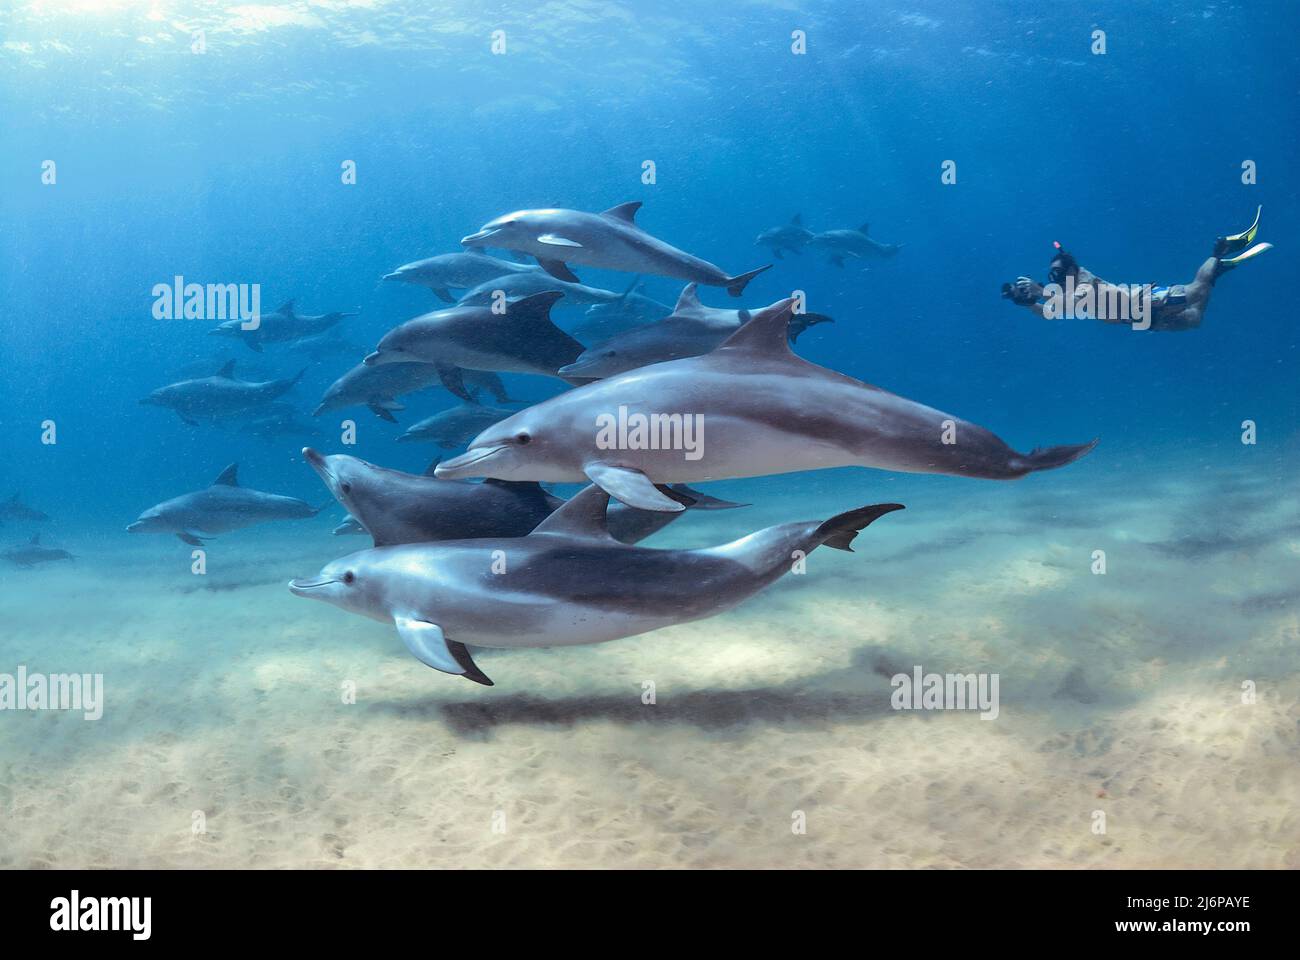 Snorkeler swimming with a group Indo-Pacific bottlenose dolphins (Tursiops aduncus), in blue water, Sodwana Bay, South Africa, Africa Stock Photo